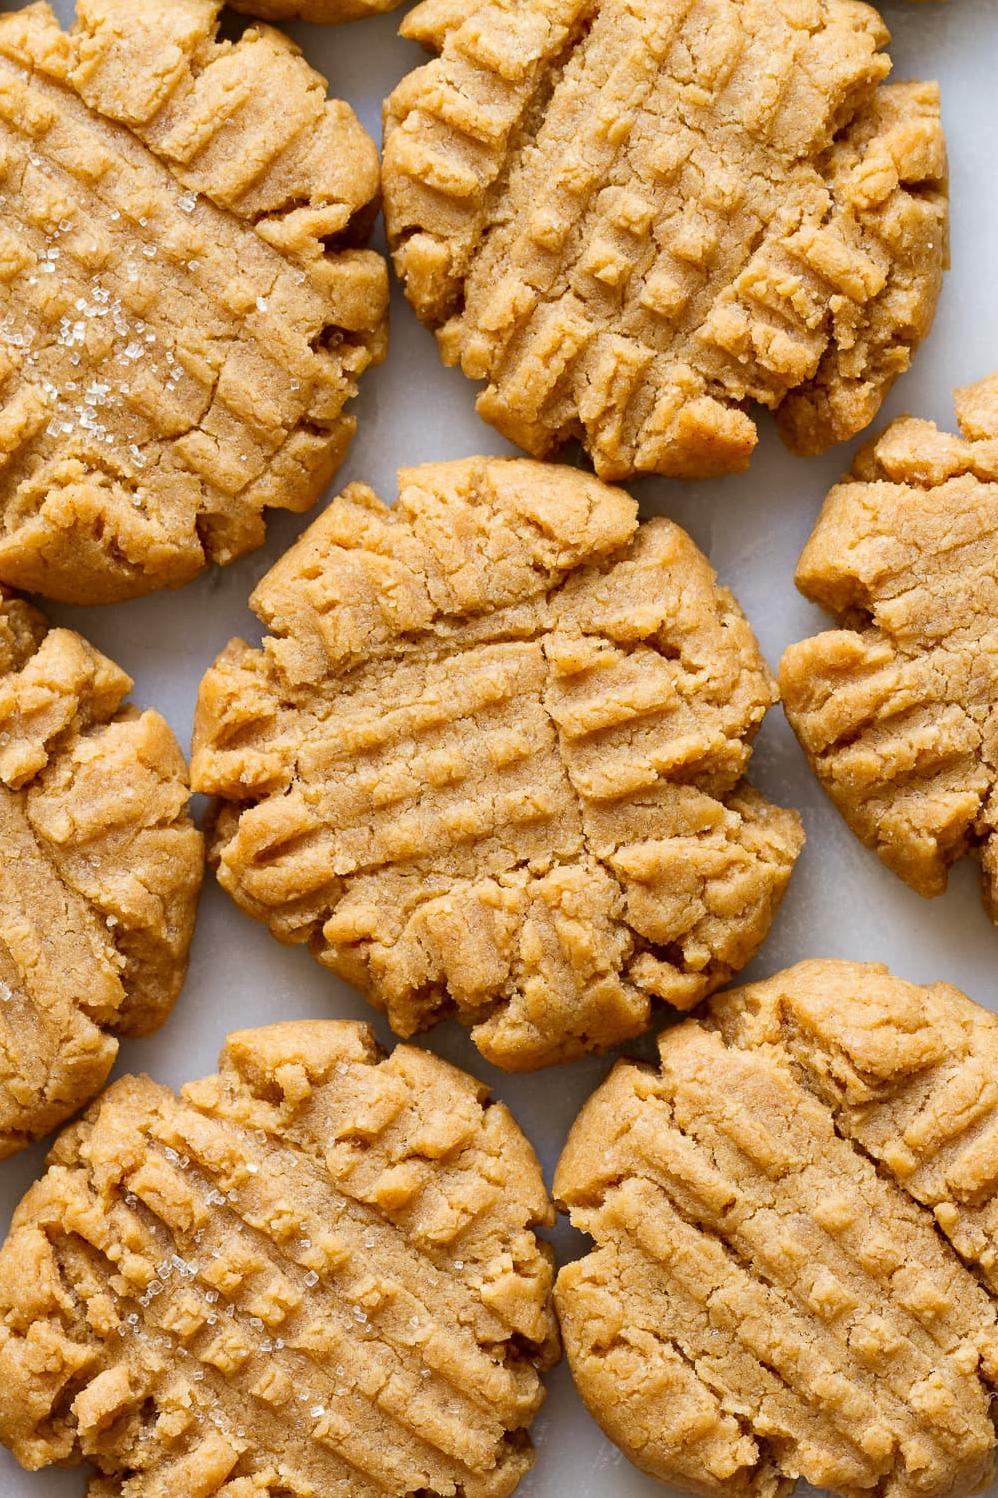  These golden-brown delights will have you reconsidering veganism - or at least wondering how they taste so indescribably good.